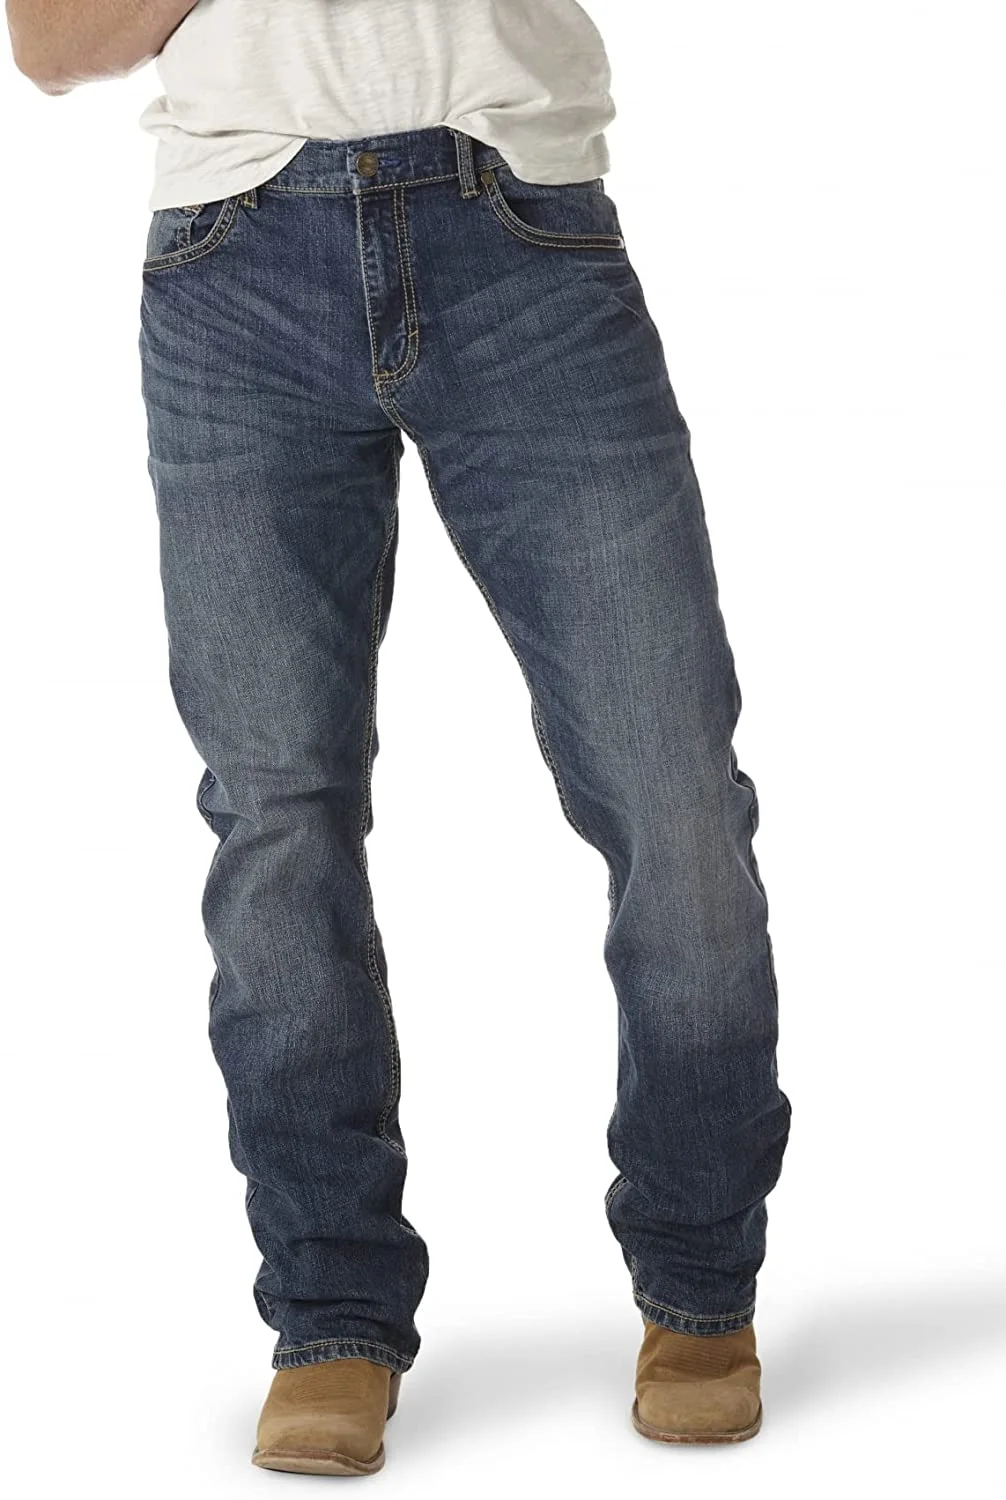 Wide Leg Jeans - Bangladesh Factory, Suppliers, Manufacturers